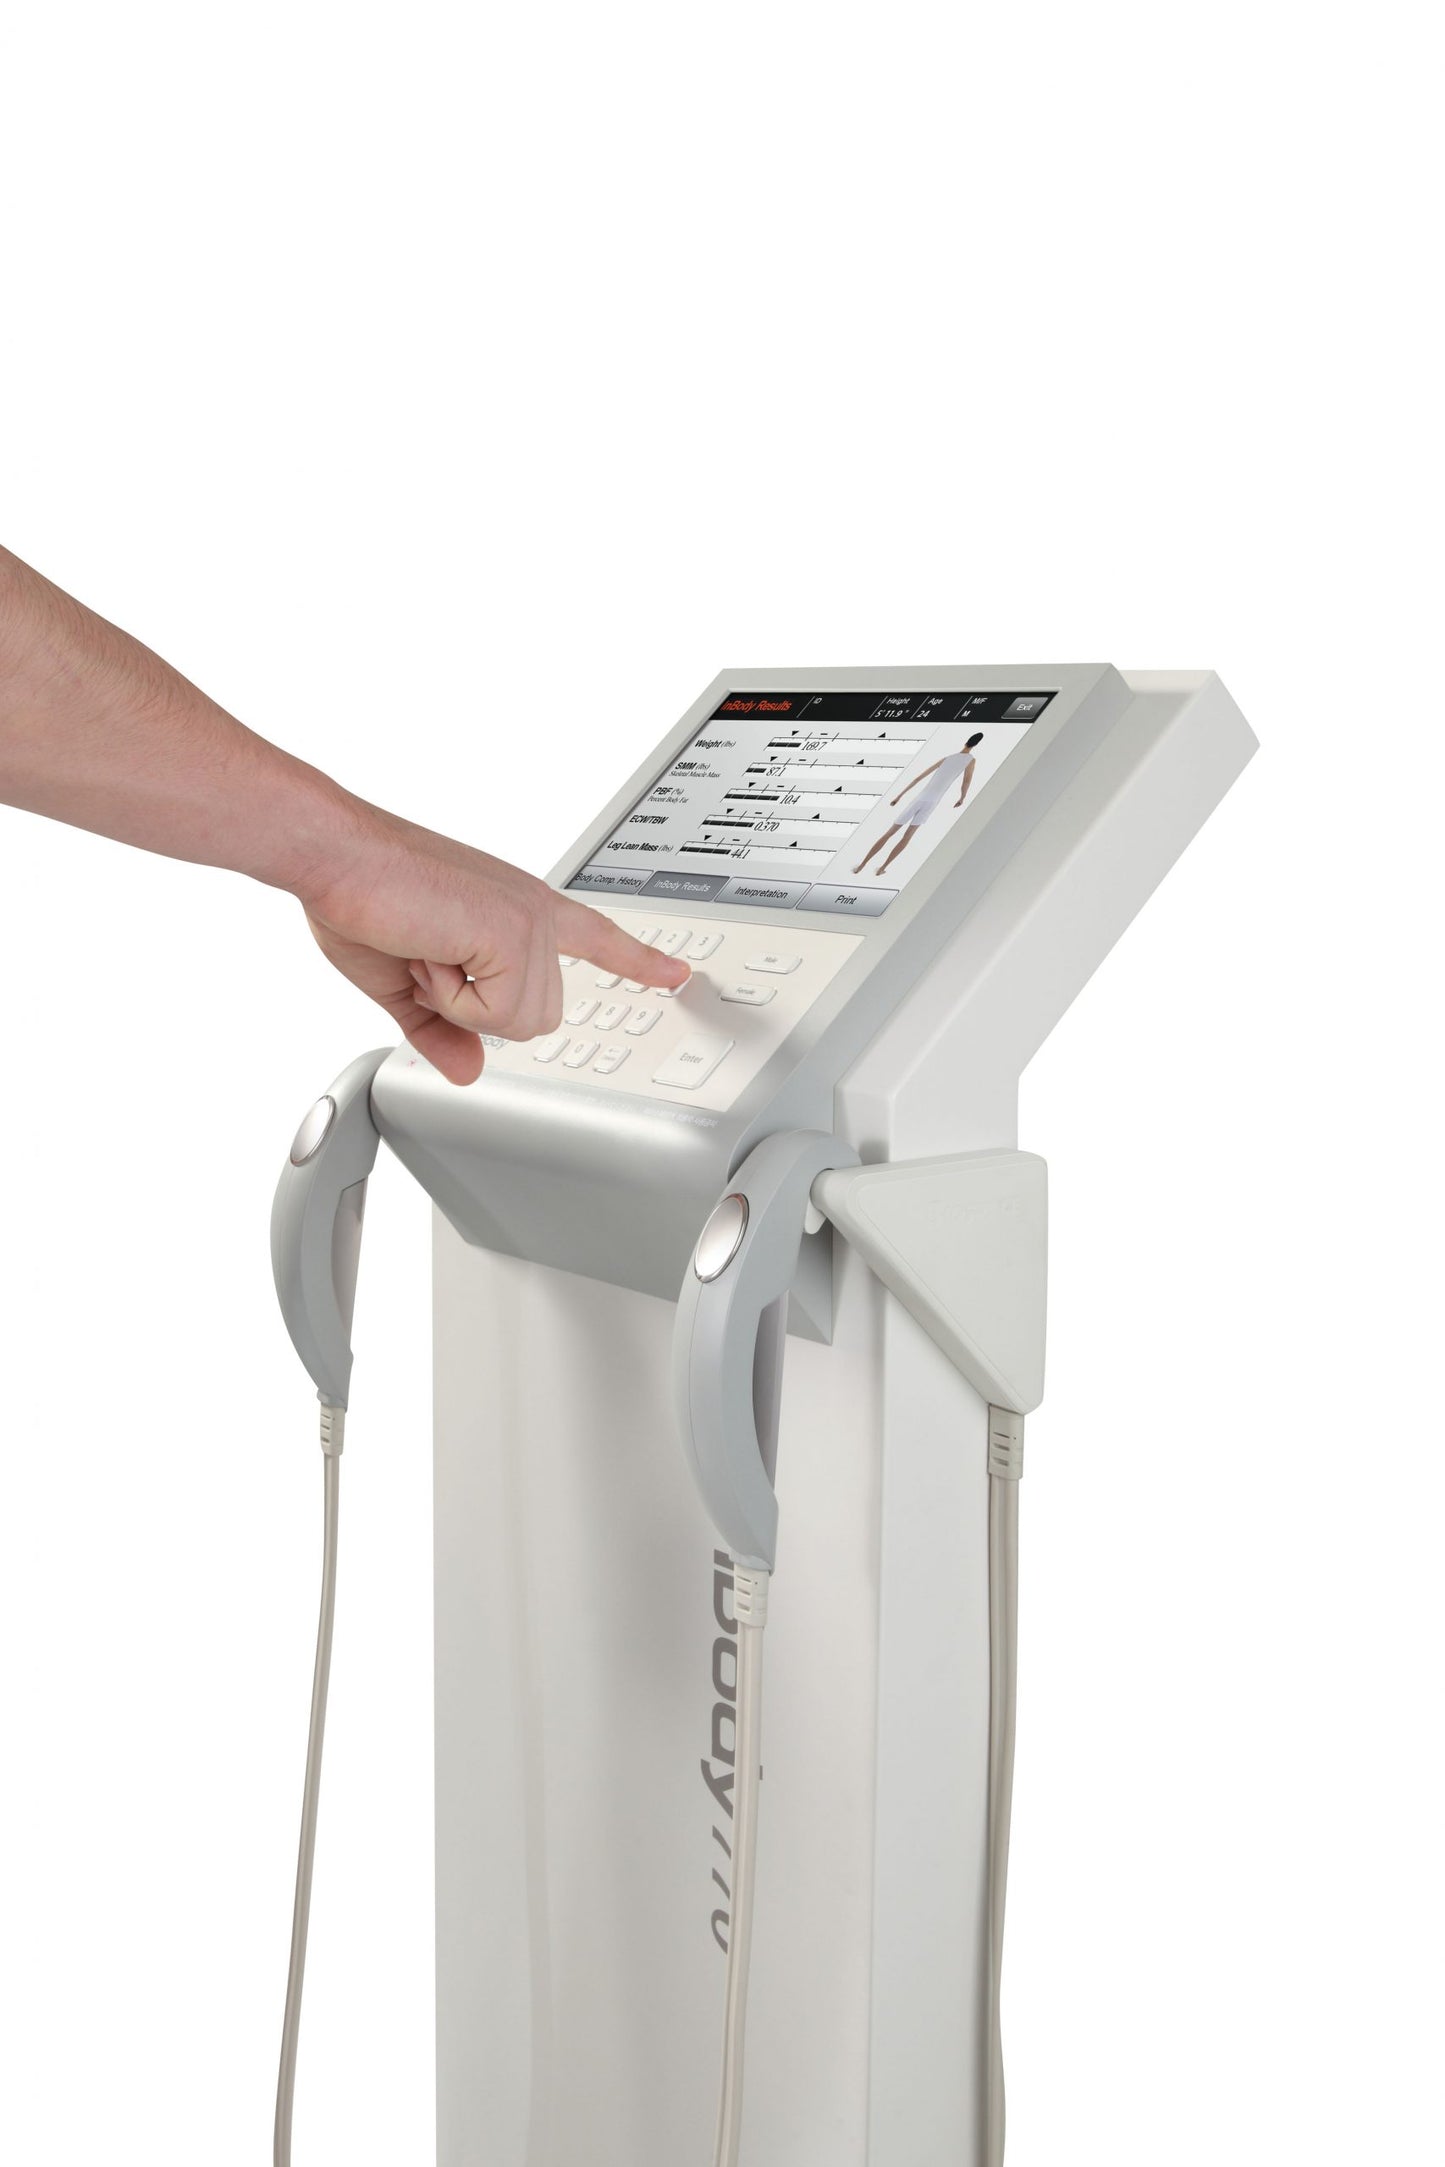 InBody 770 Ultimate Body Composition Analyser